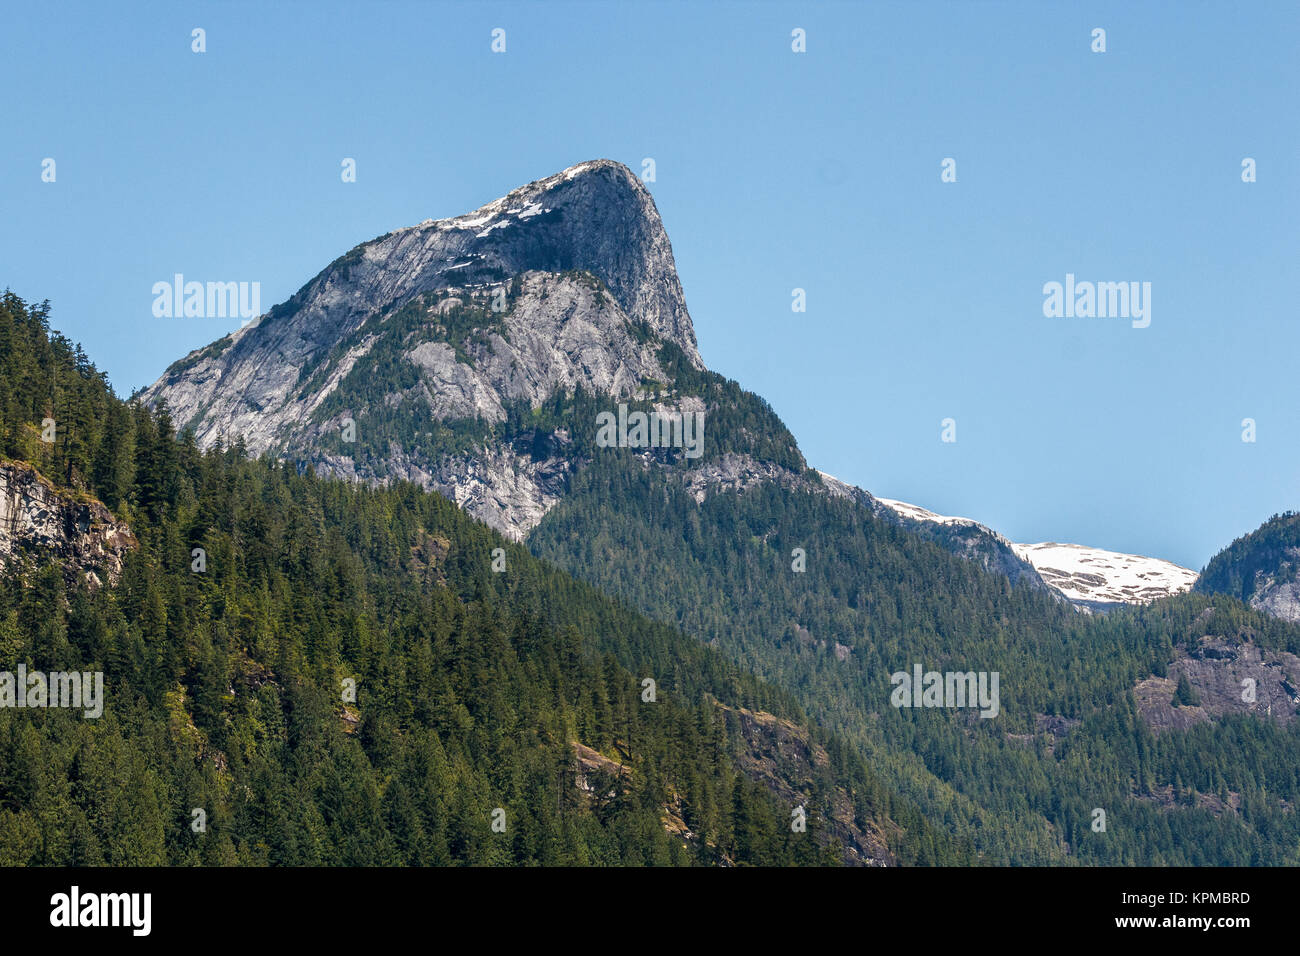 British Columbia's Princess Louisa Inlet is surrounded by glaciers and high, rugged peaks of the Coast Mountains, including this sheer granite face. Stock Photo